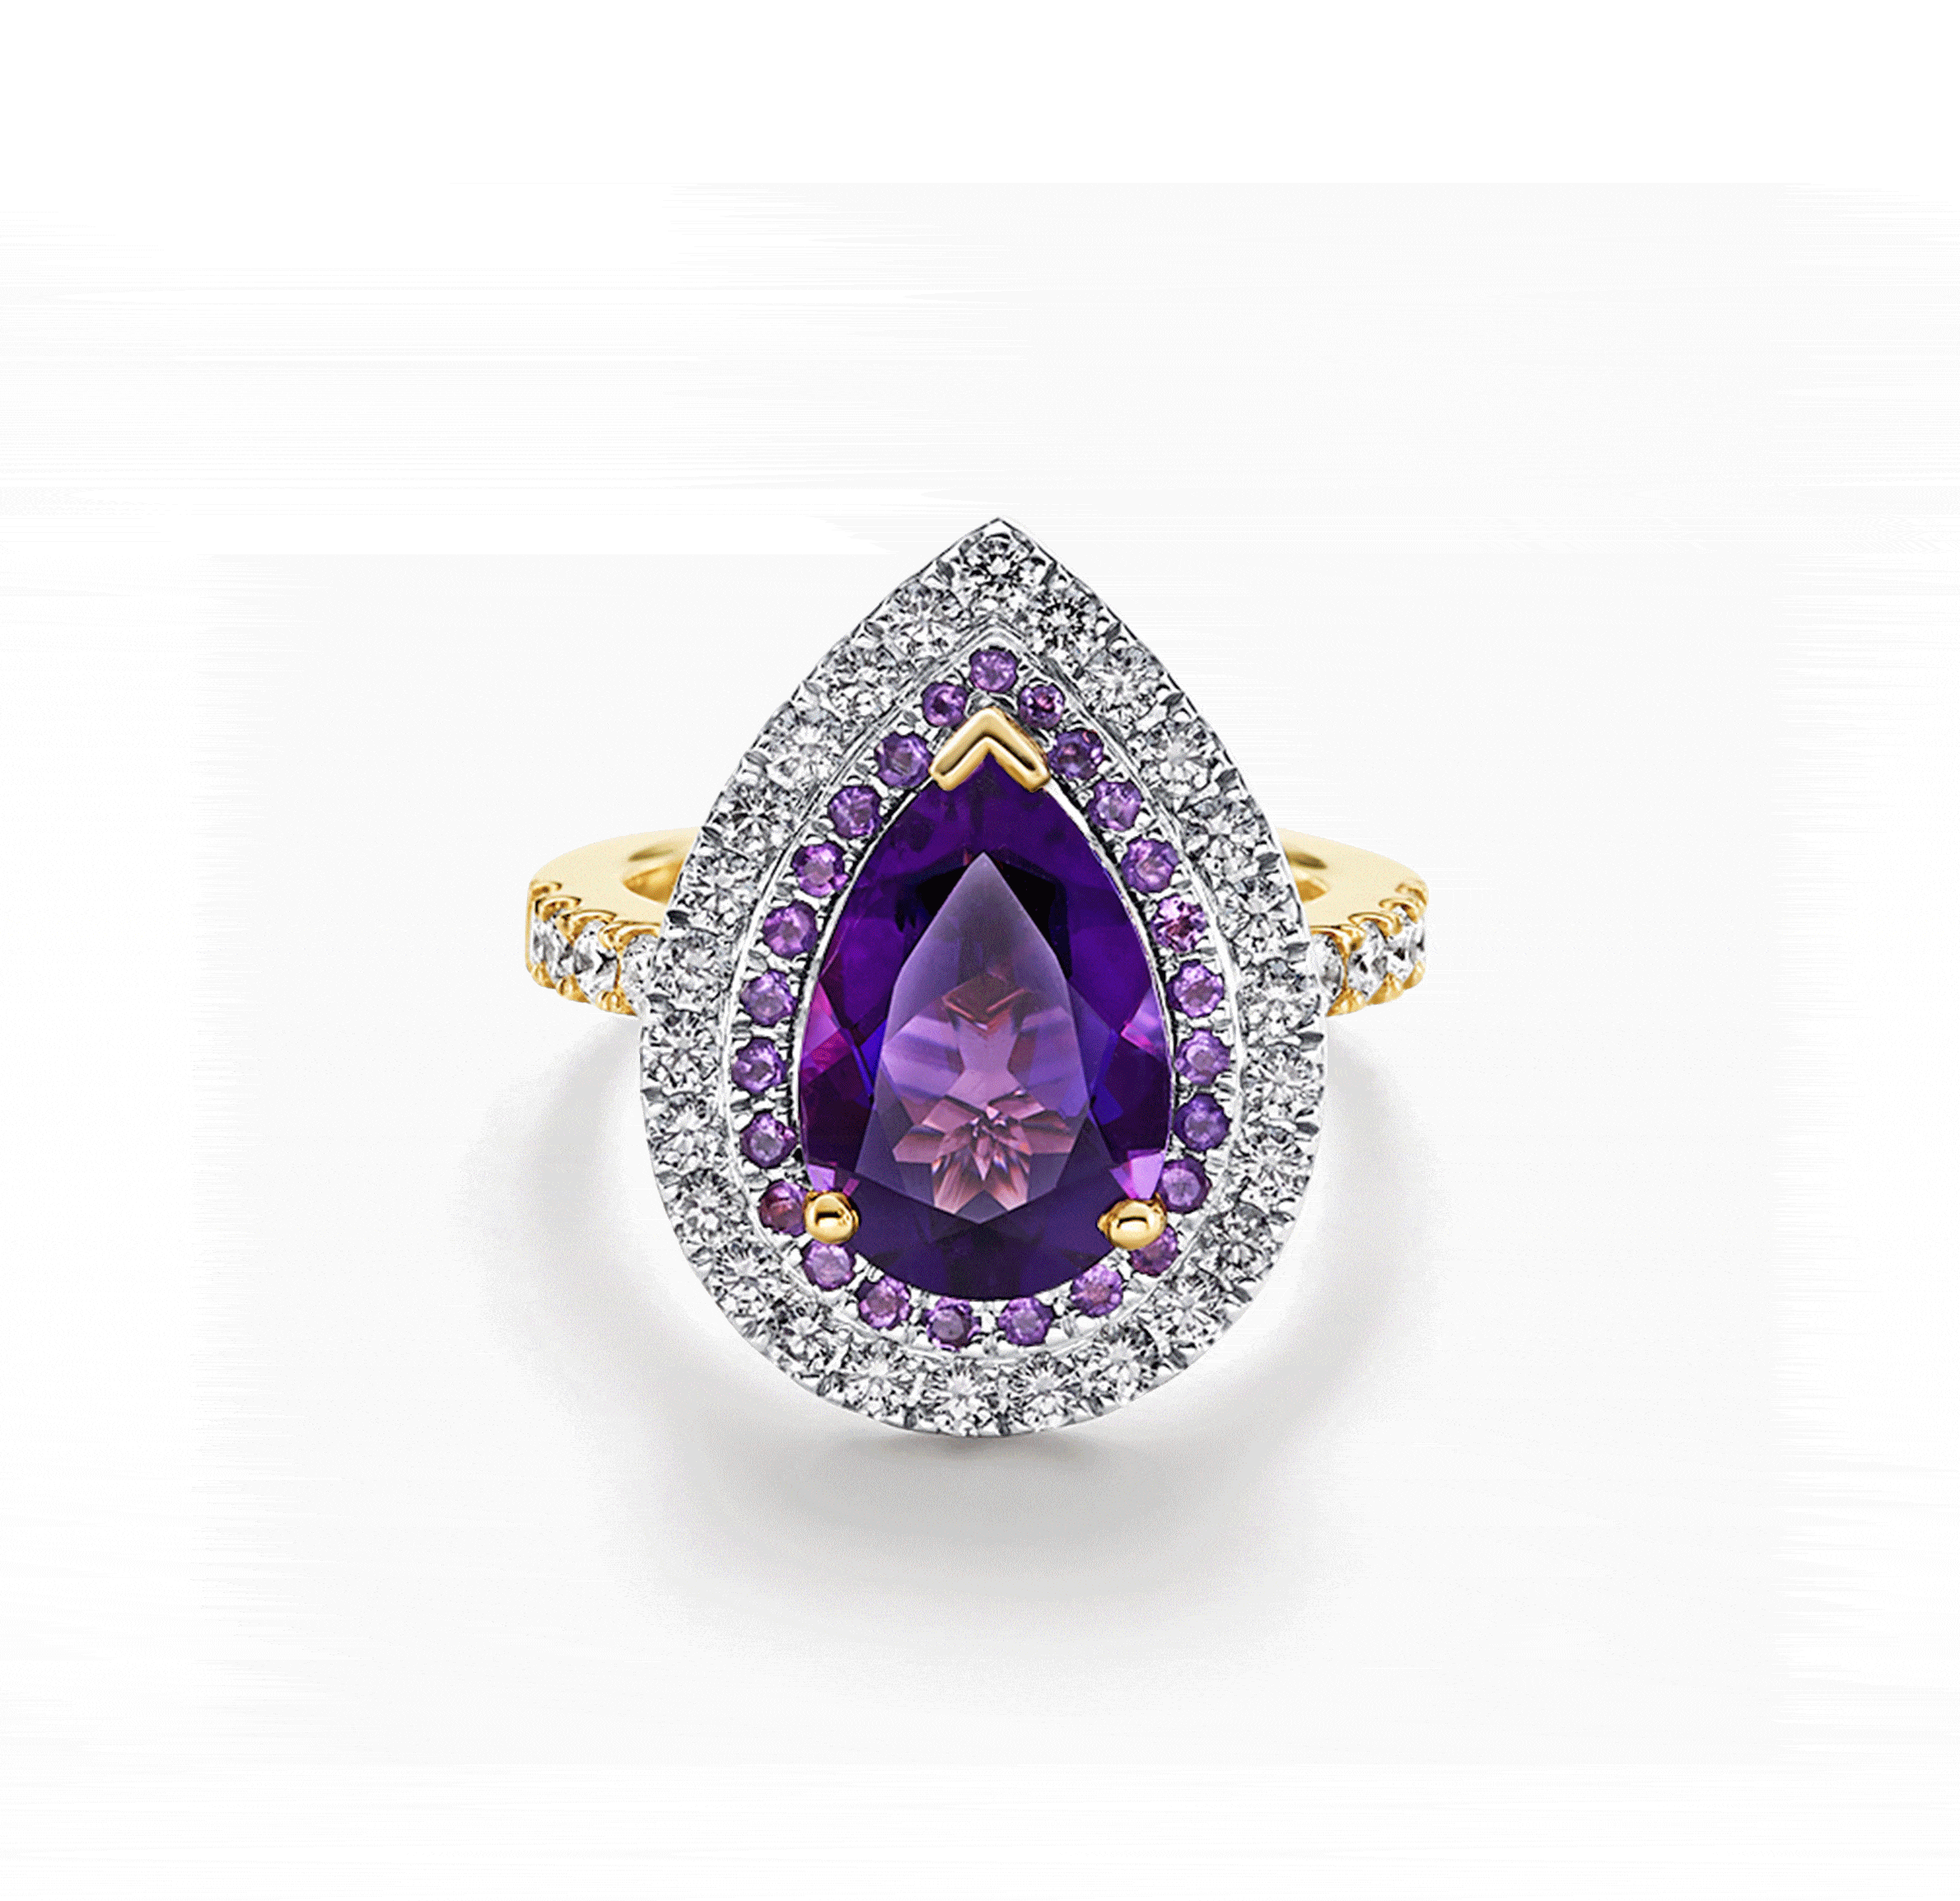 Amethyst- Month of February